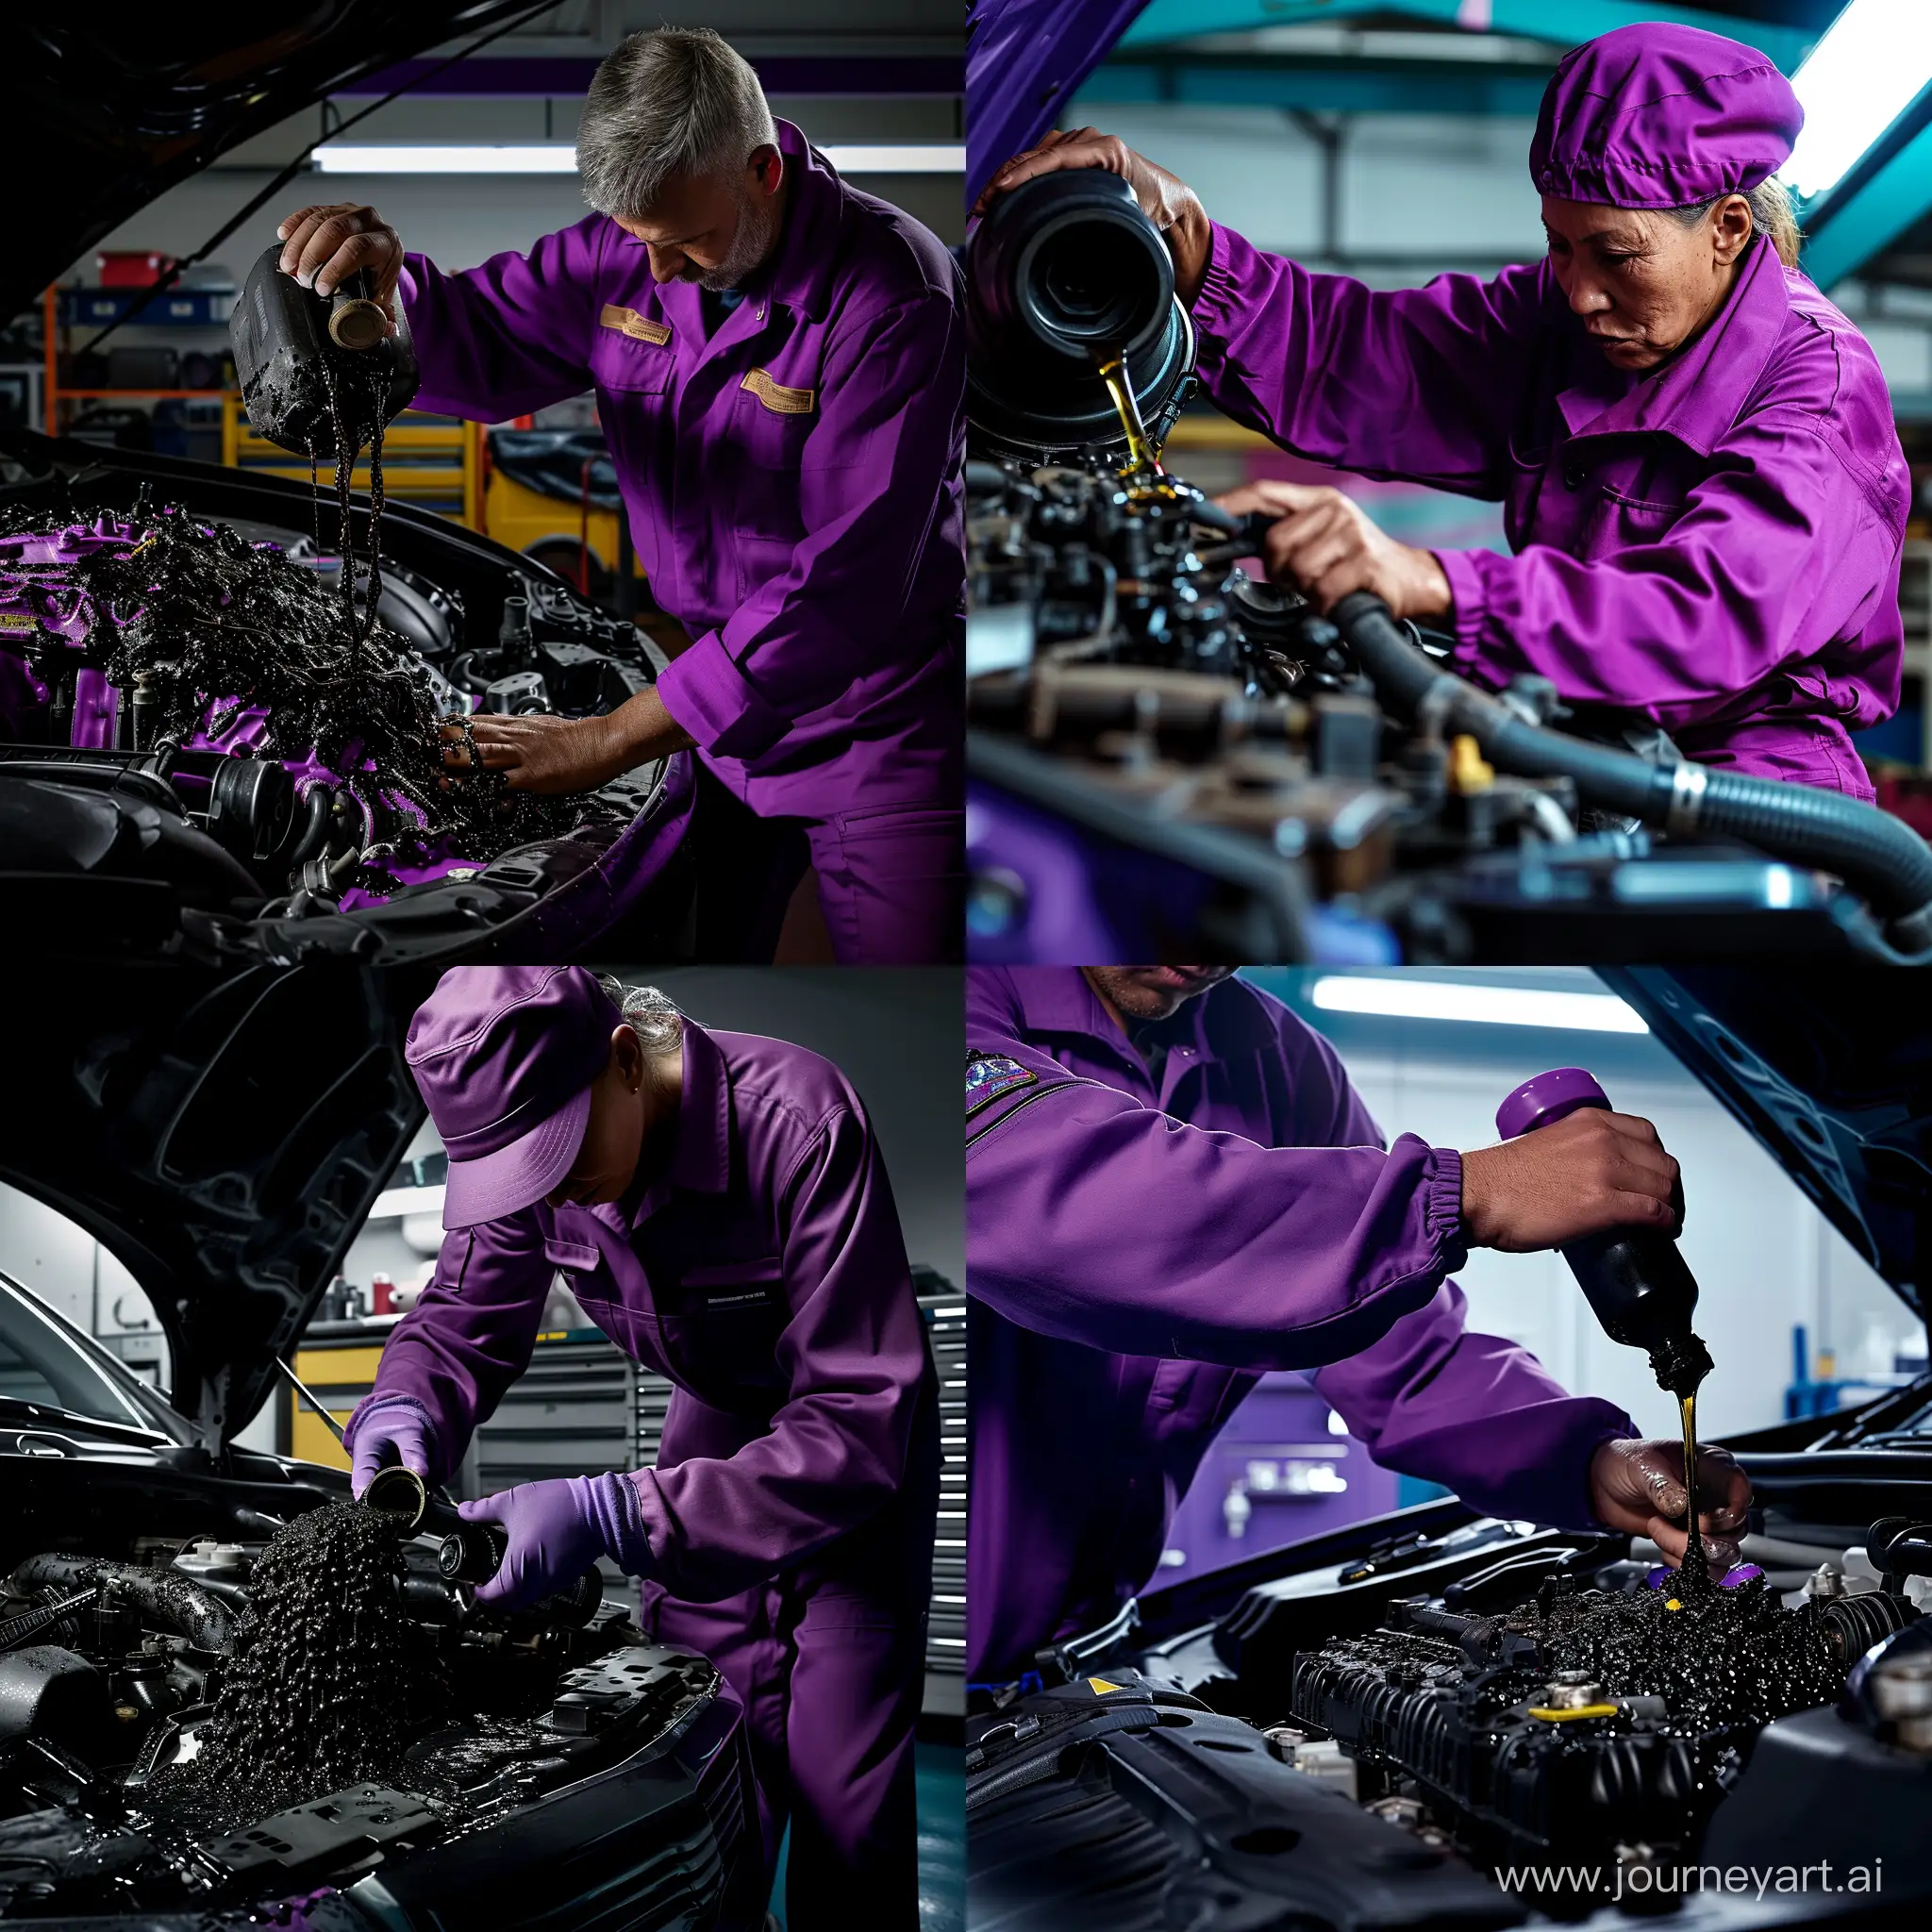 ultra realistic, a mechanic wearing a purple outfit was filling black lubrex oil into the car's engine, modern workshop, canon eos-id x mark iii dslr --v 6.0